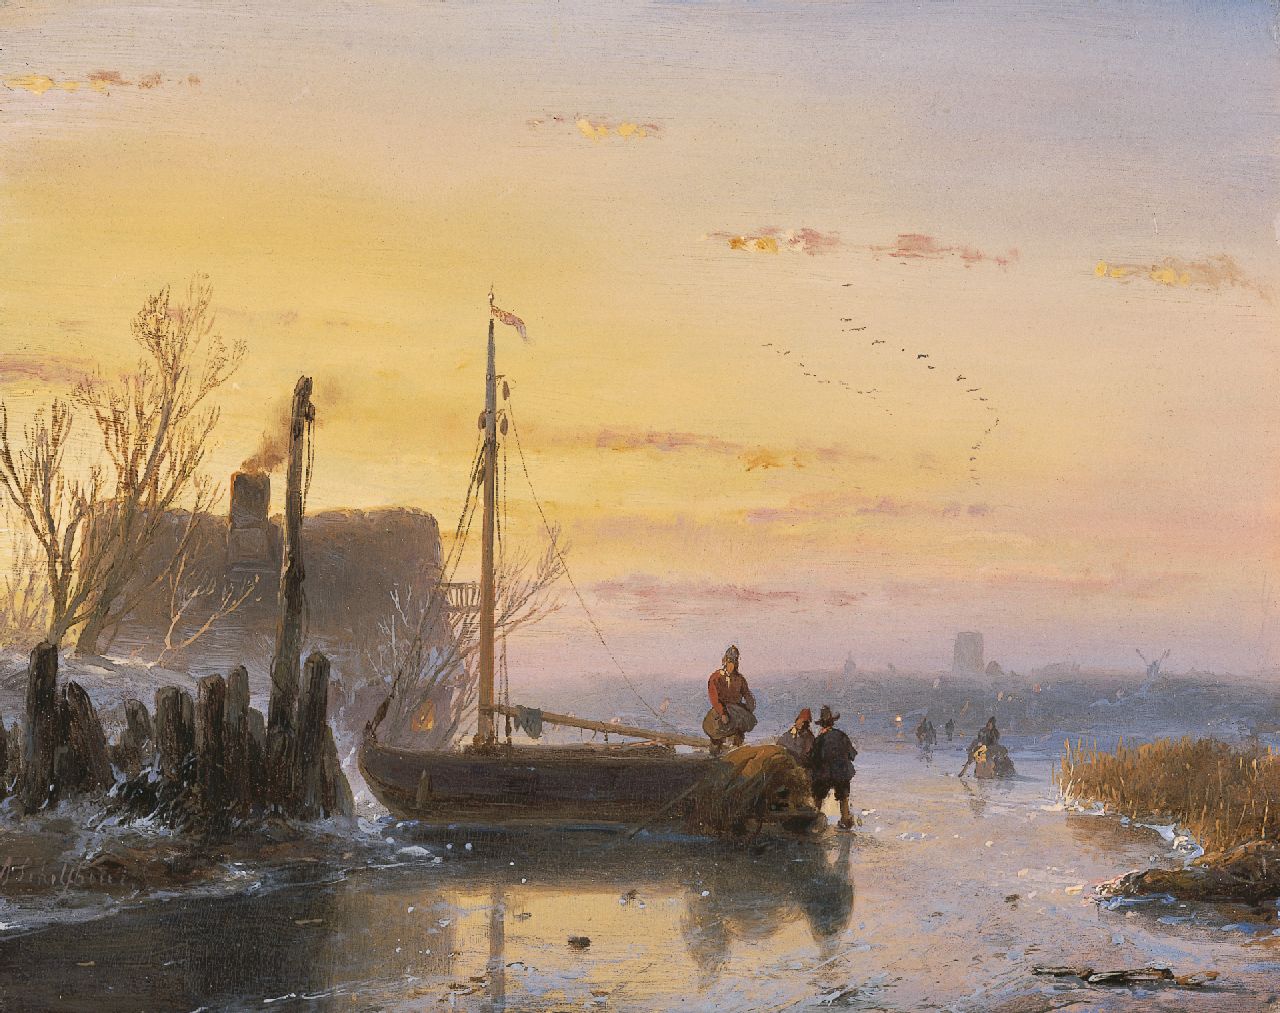 Schelfhout A.  | Andreas Schelfhout, Skaters near a frozen up fishing boat, oil on panel 15.1 x 19.1 cm, signed l.l. and painted circa 1850